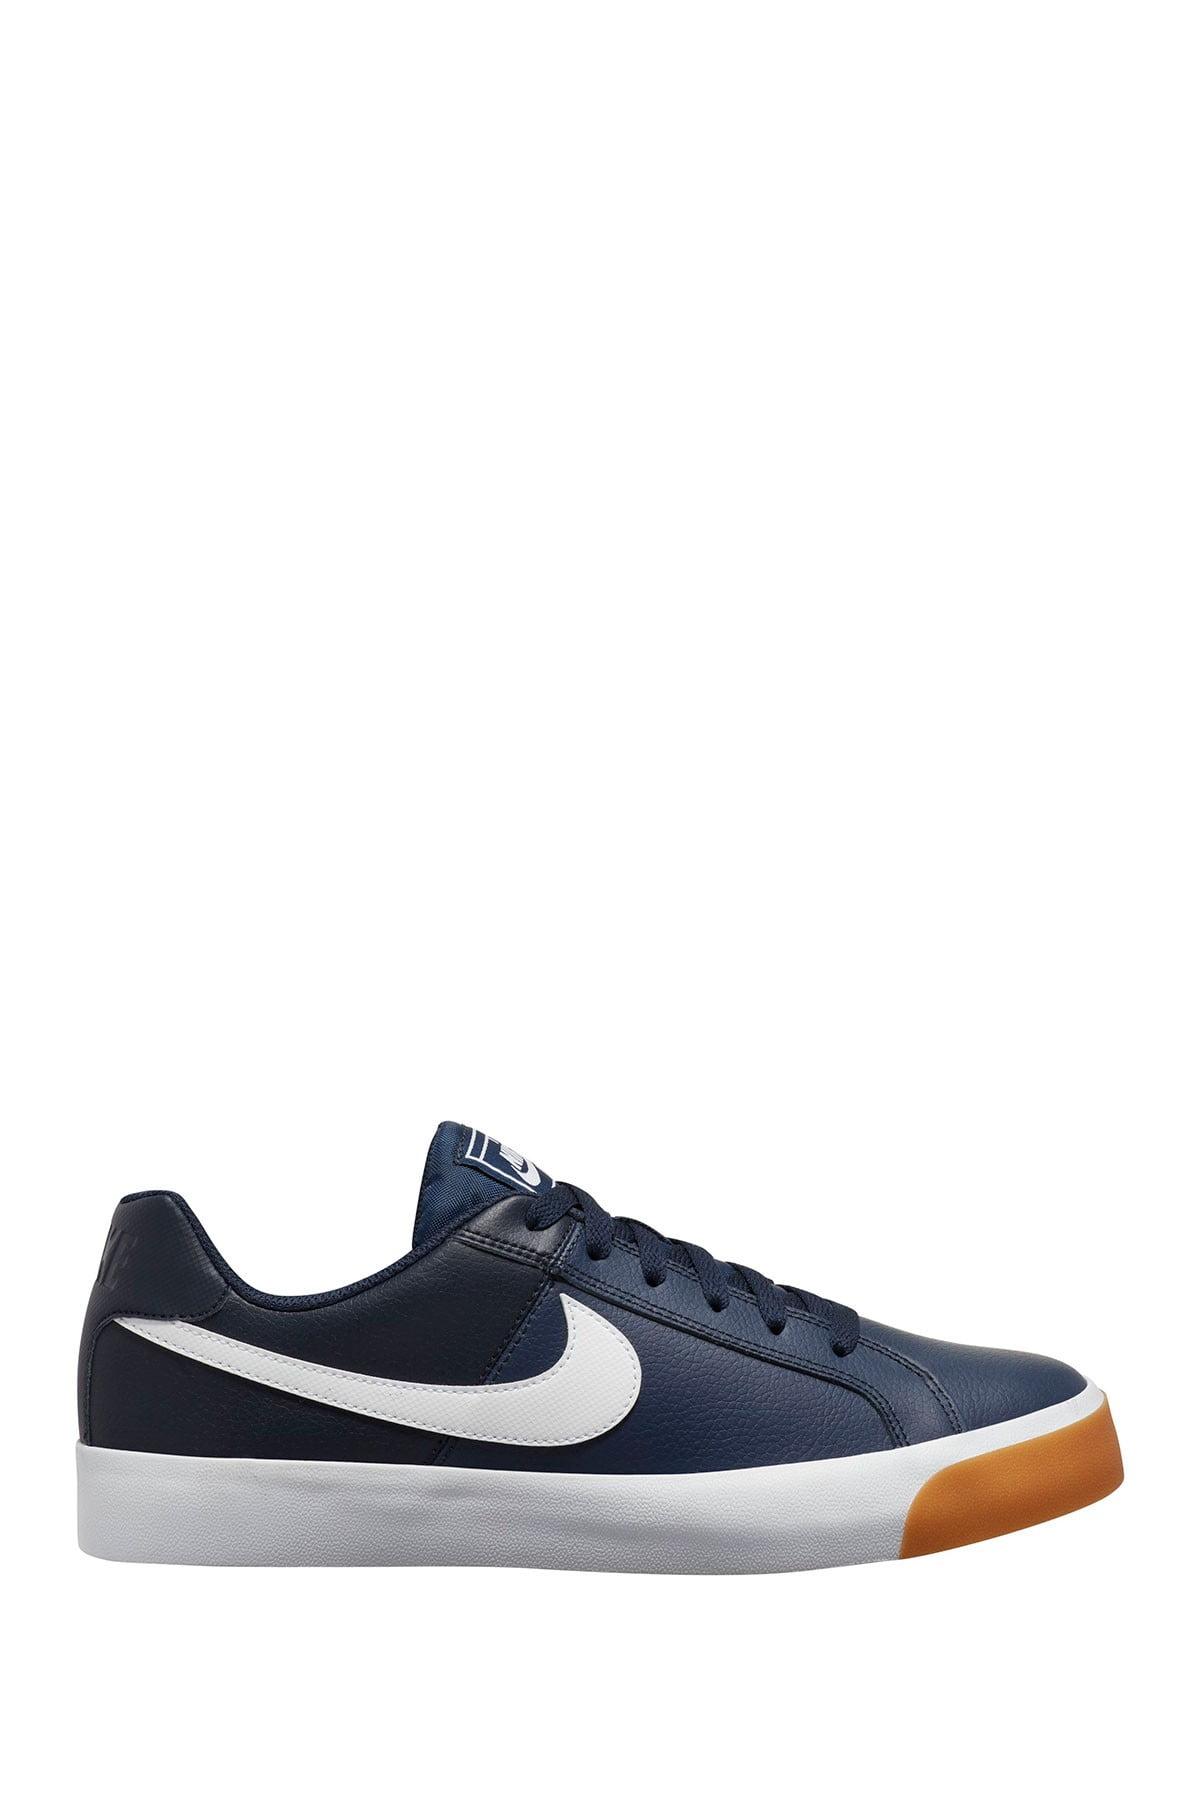 Nike Synthetic Court Royale Ac in Marine Blue (Blue) for Men - Lyst